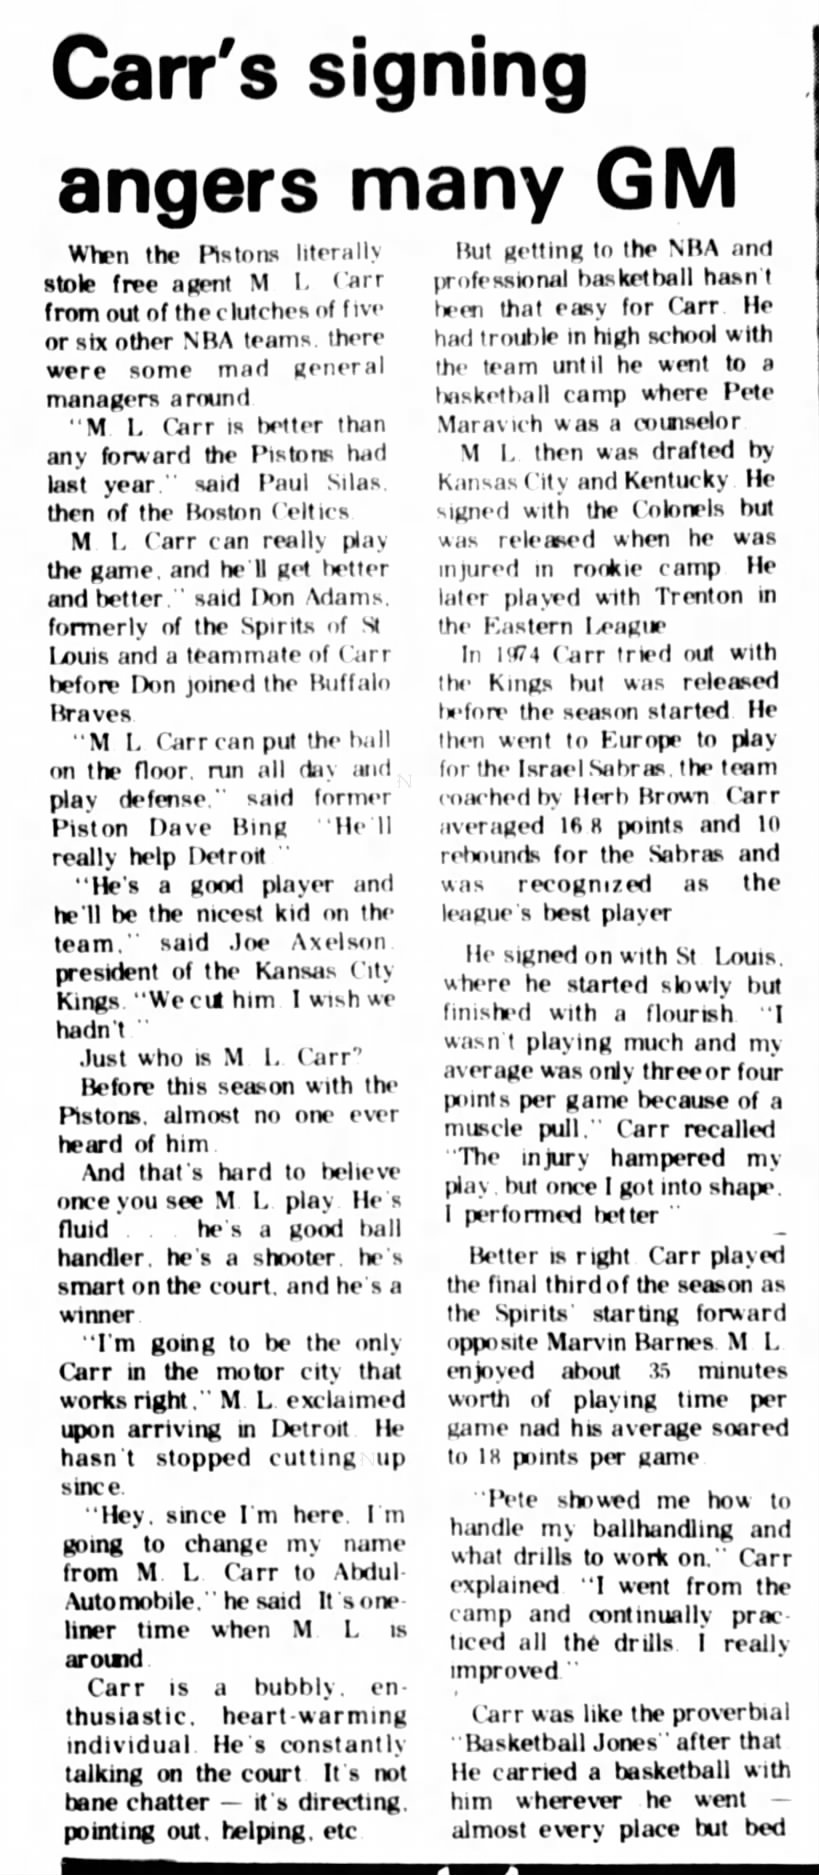 M.L. Carr signs with NBA Dec '76